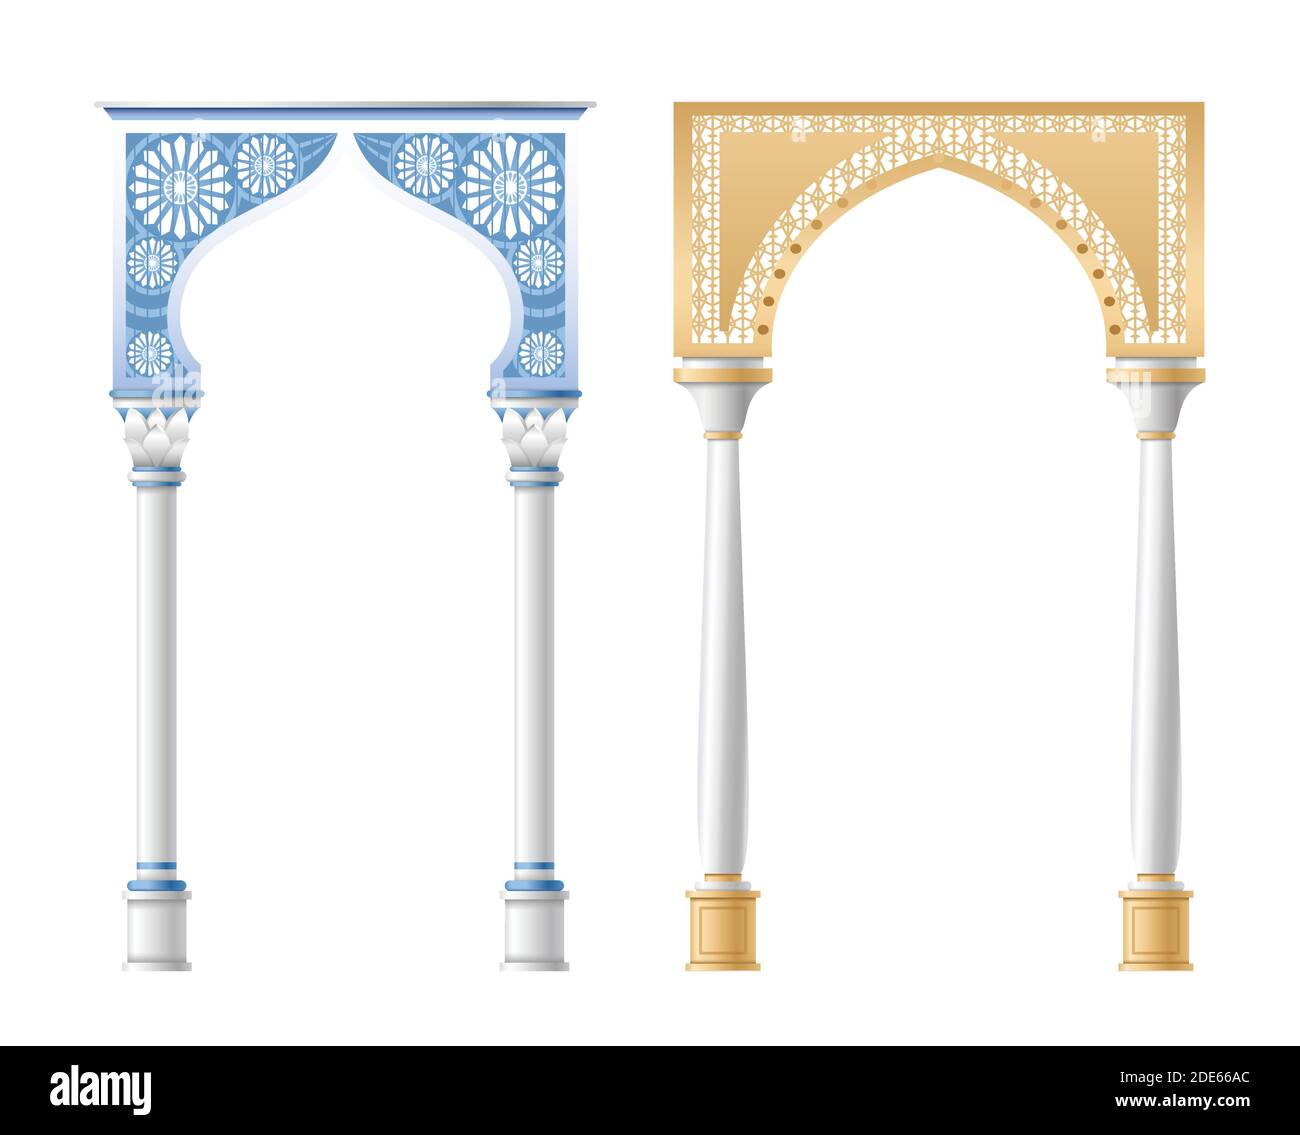 Vector illustration of architectural columns, pillars and arches isolated on white background. Stock Vector